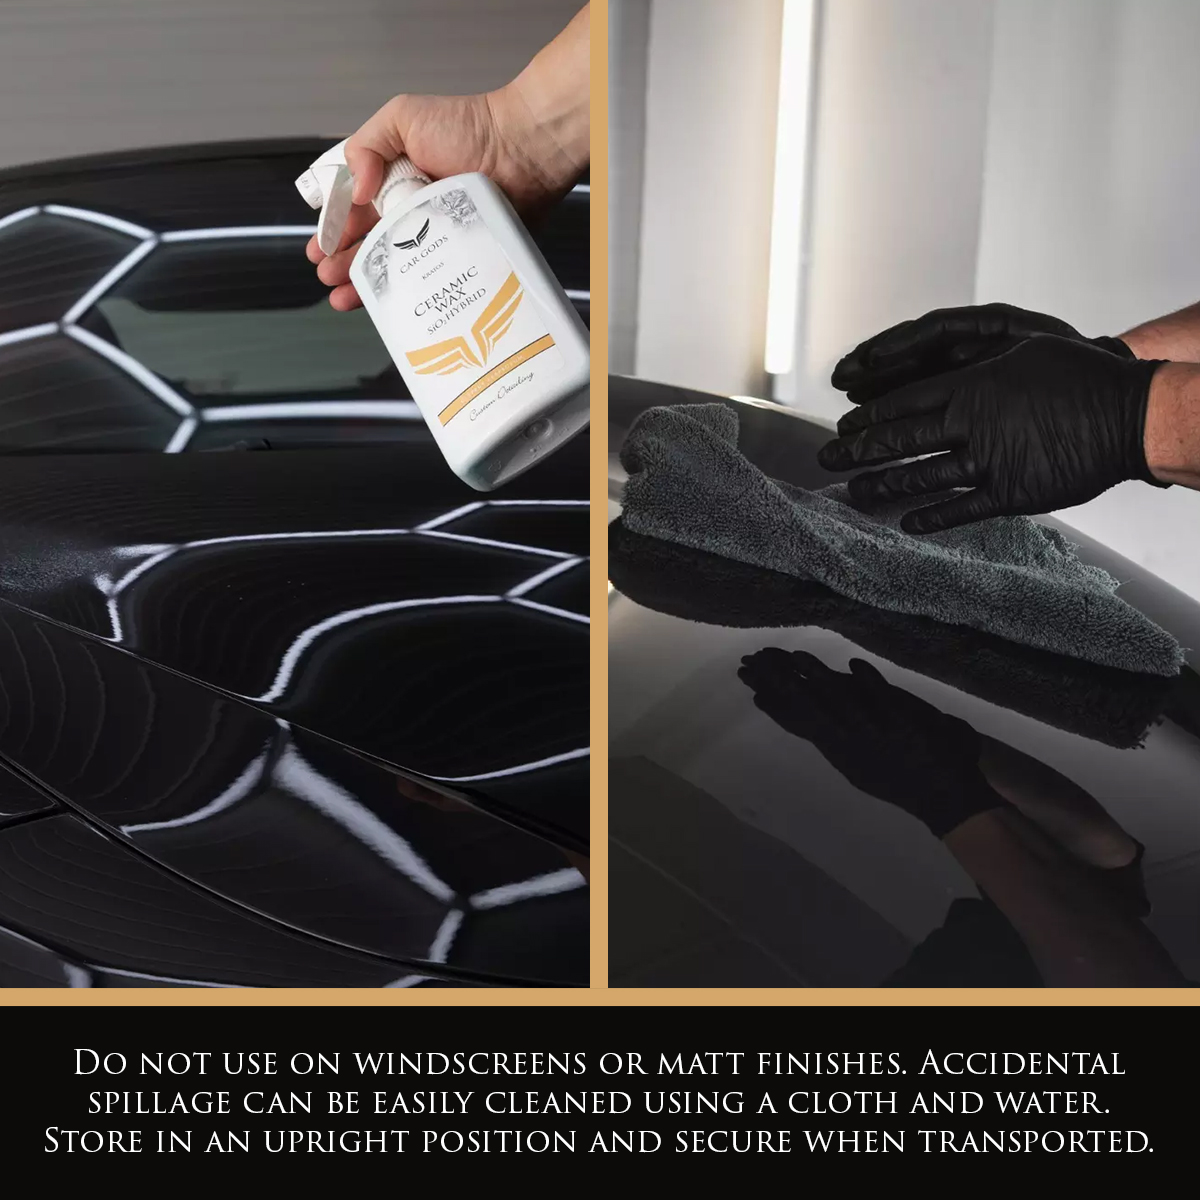 Left image shows Car Gods Ceramic SiO2 Hybrid Wax Spray being sprayed onto a black vehicle, the right image shows the solution being buffed off the vehicle surface with a grey microfibre cloth. Text: Do not use on windscreens or matt finishes. Accidental spillage can be easily cleaned using a cloth and water. Store in an upright position and secure when transported.